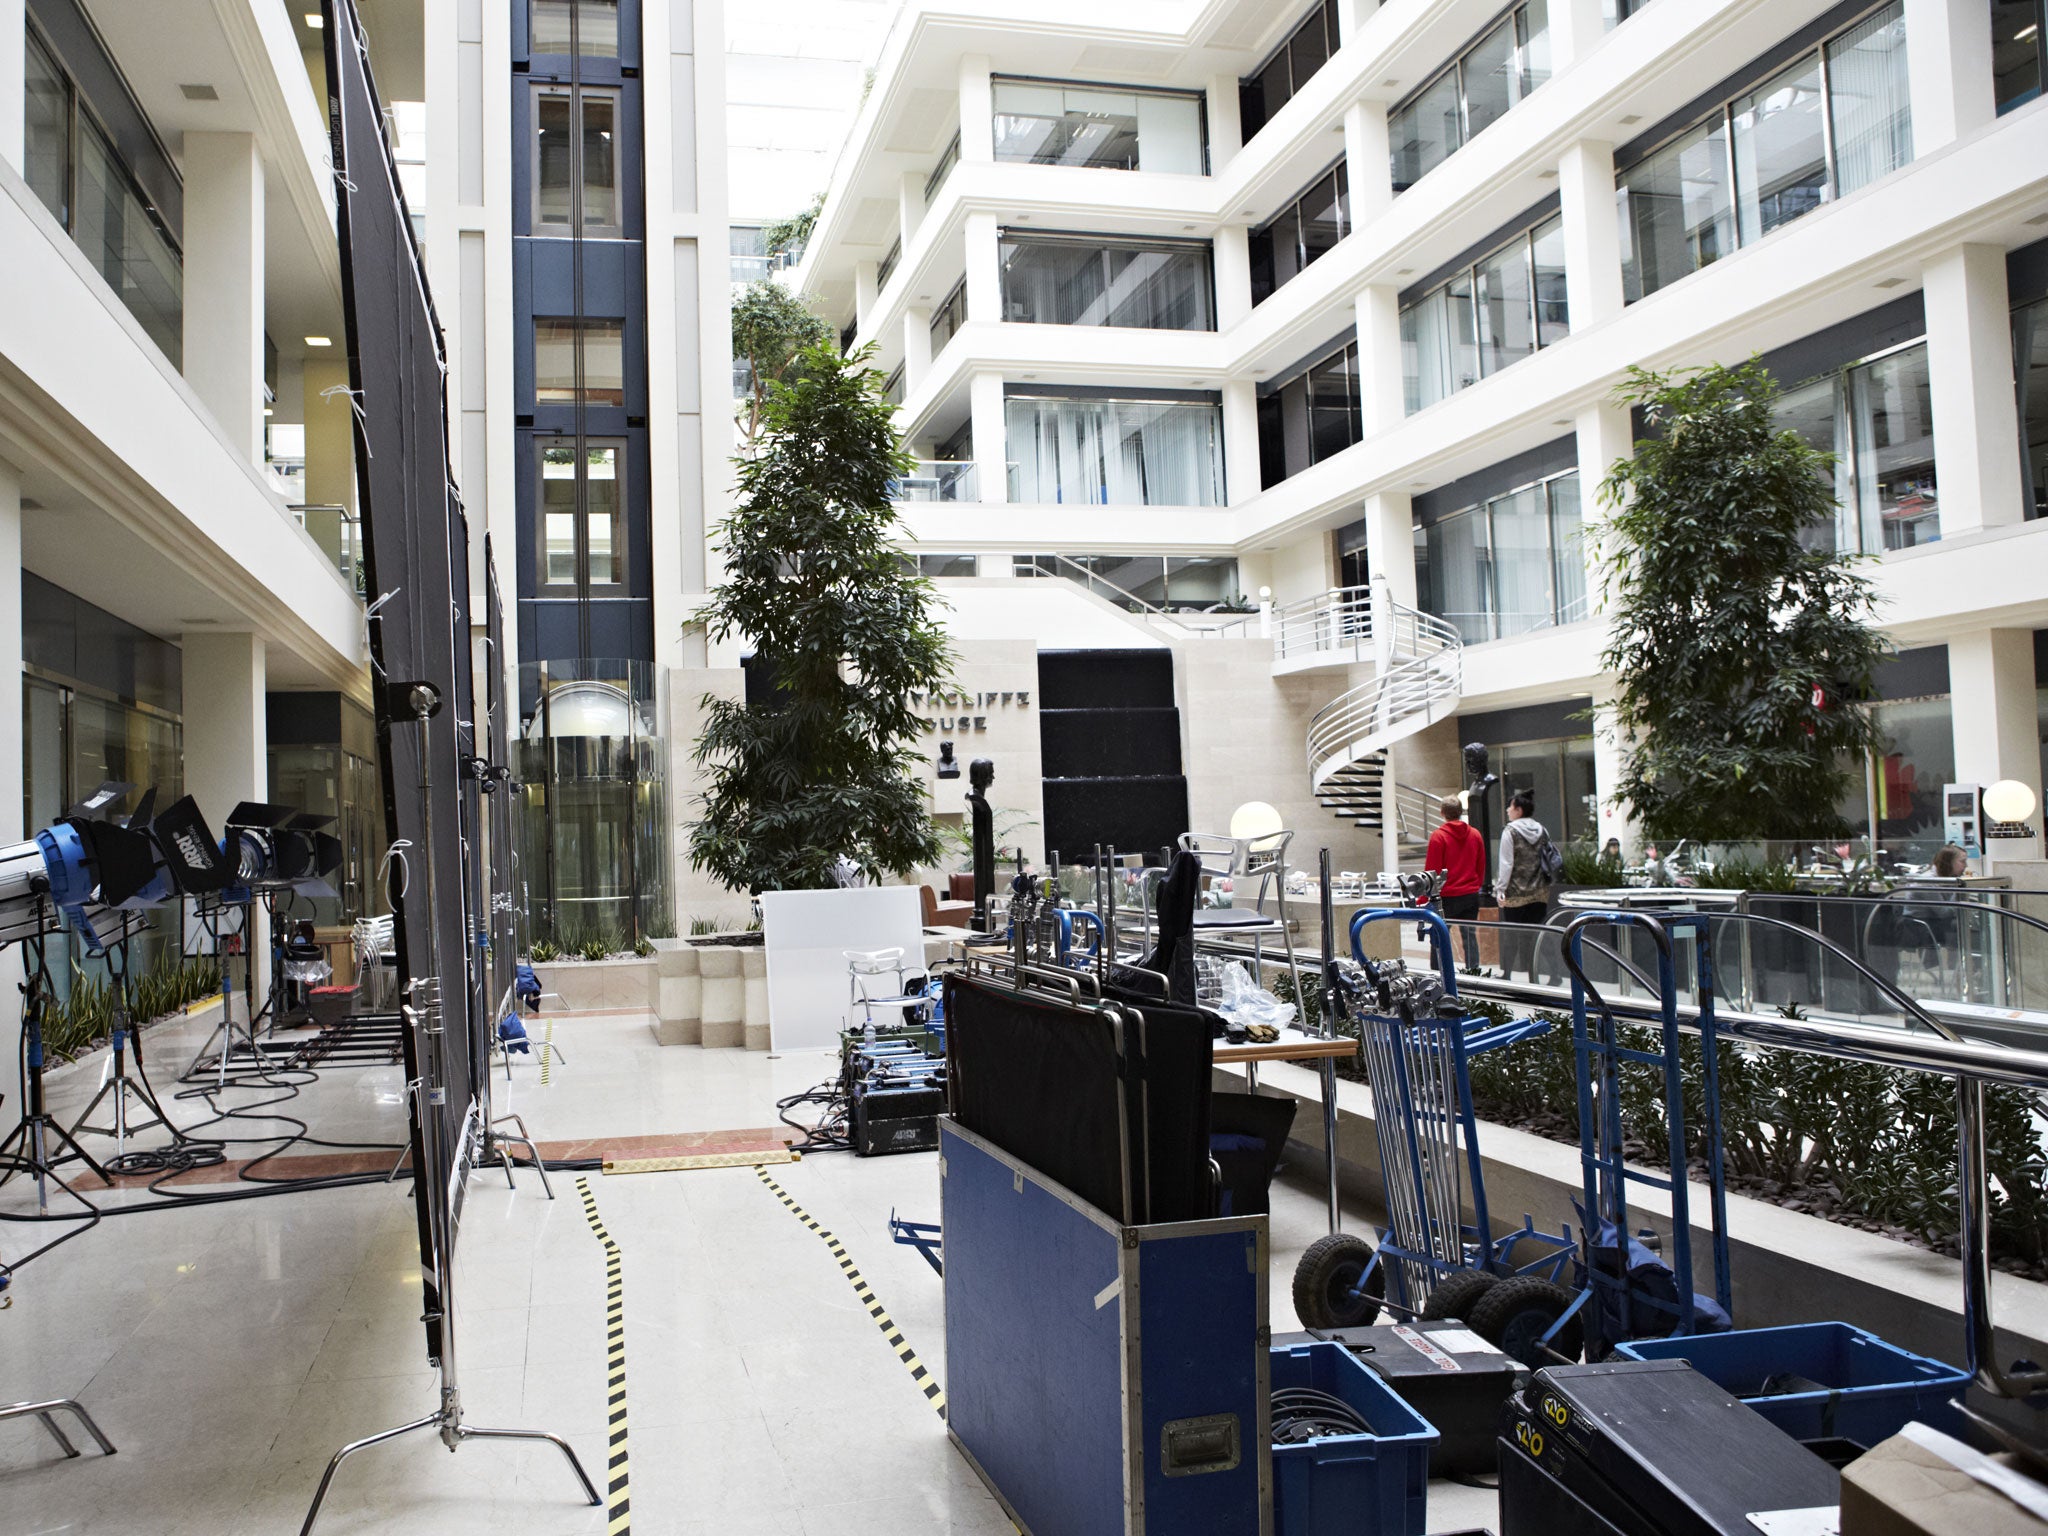 The atrium at Northcliffe house (also home of The Daily Mail)